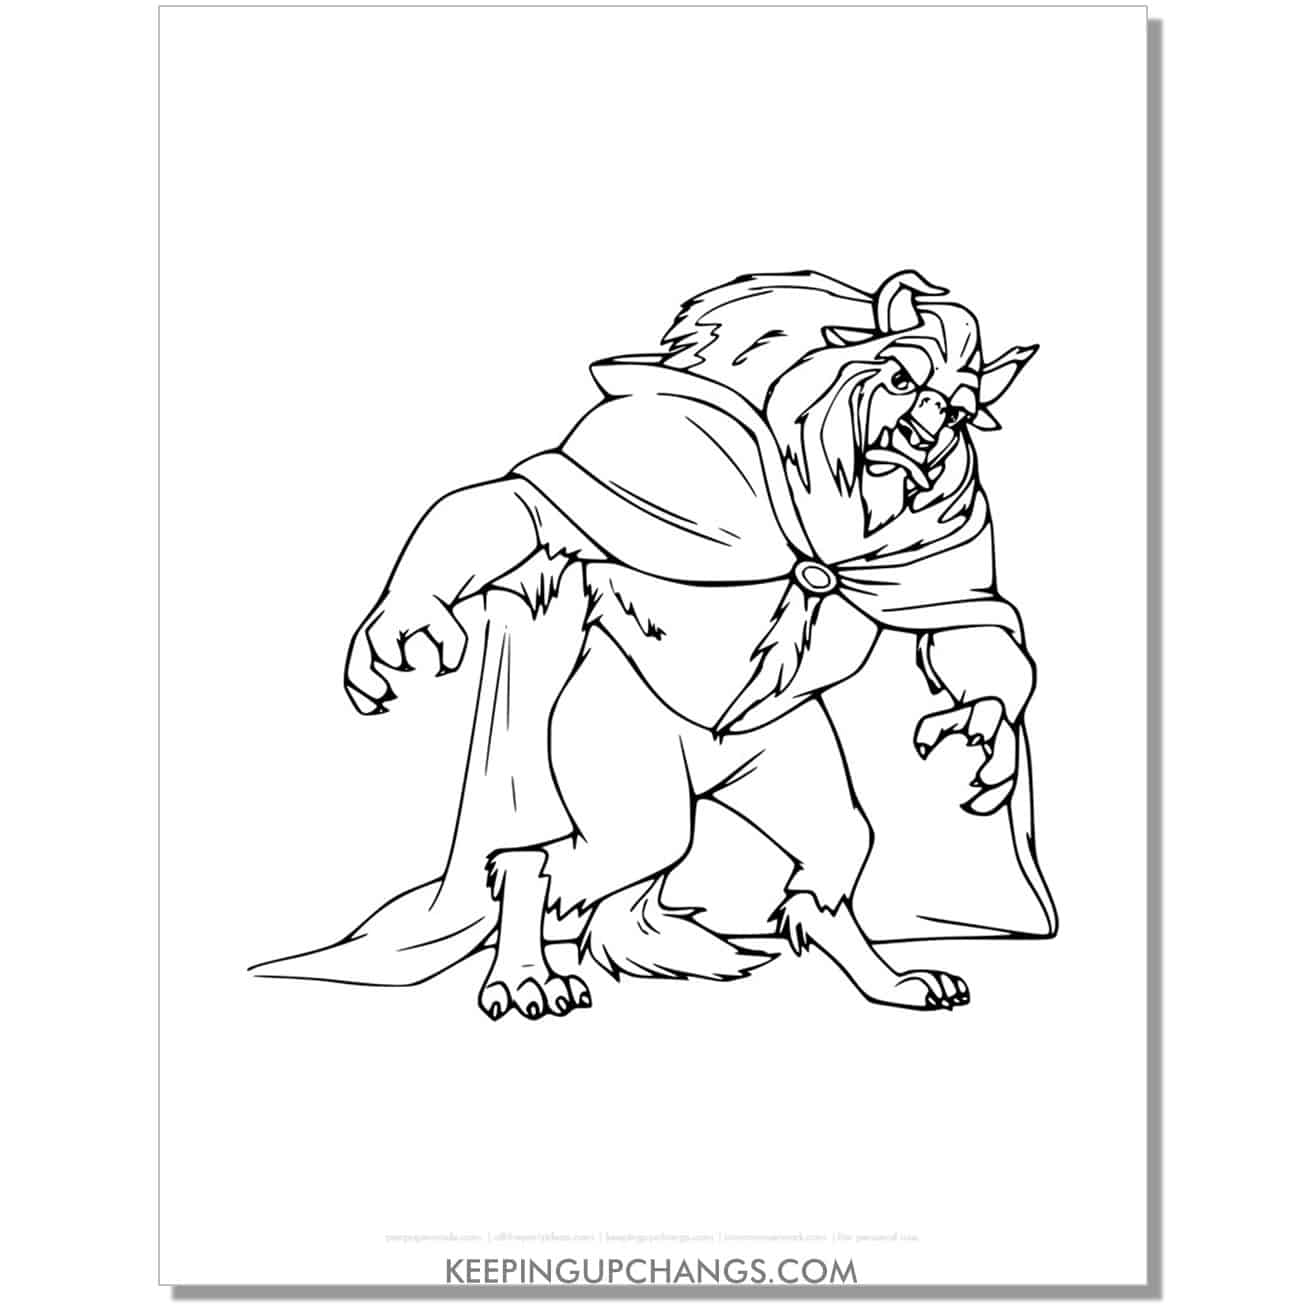 beast curled over coloring page, sheet.